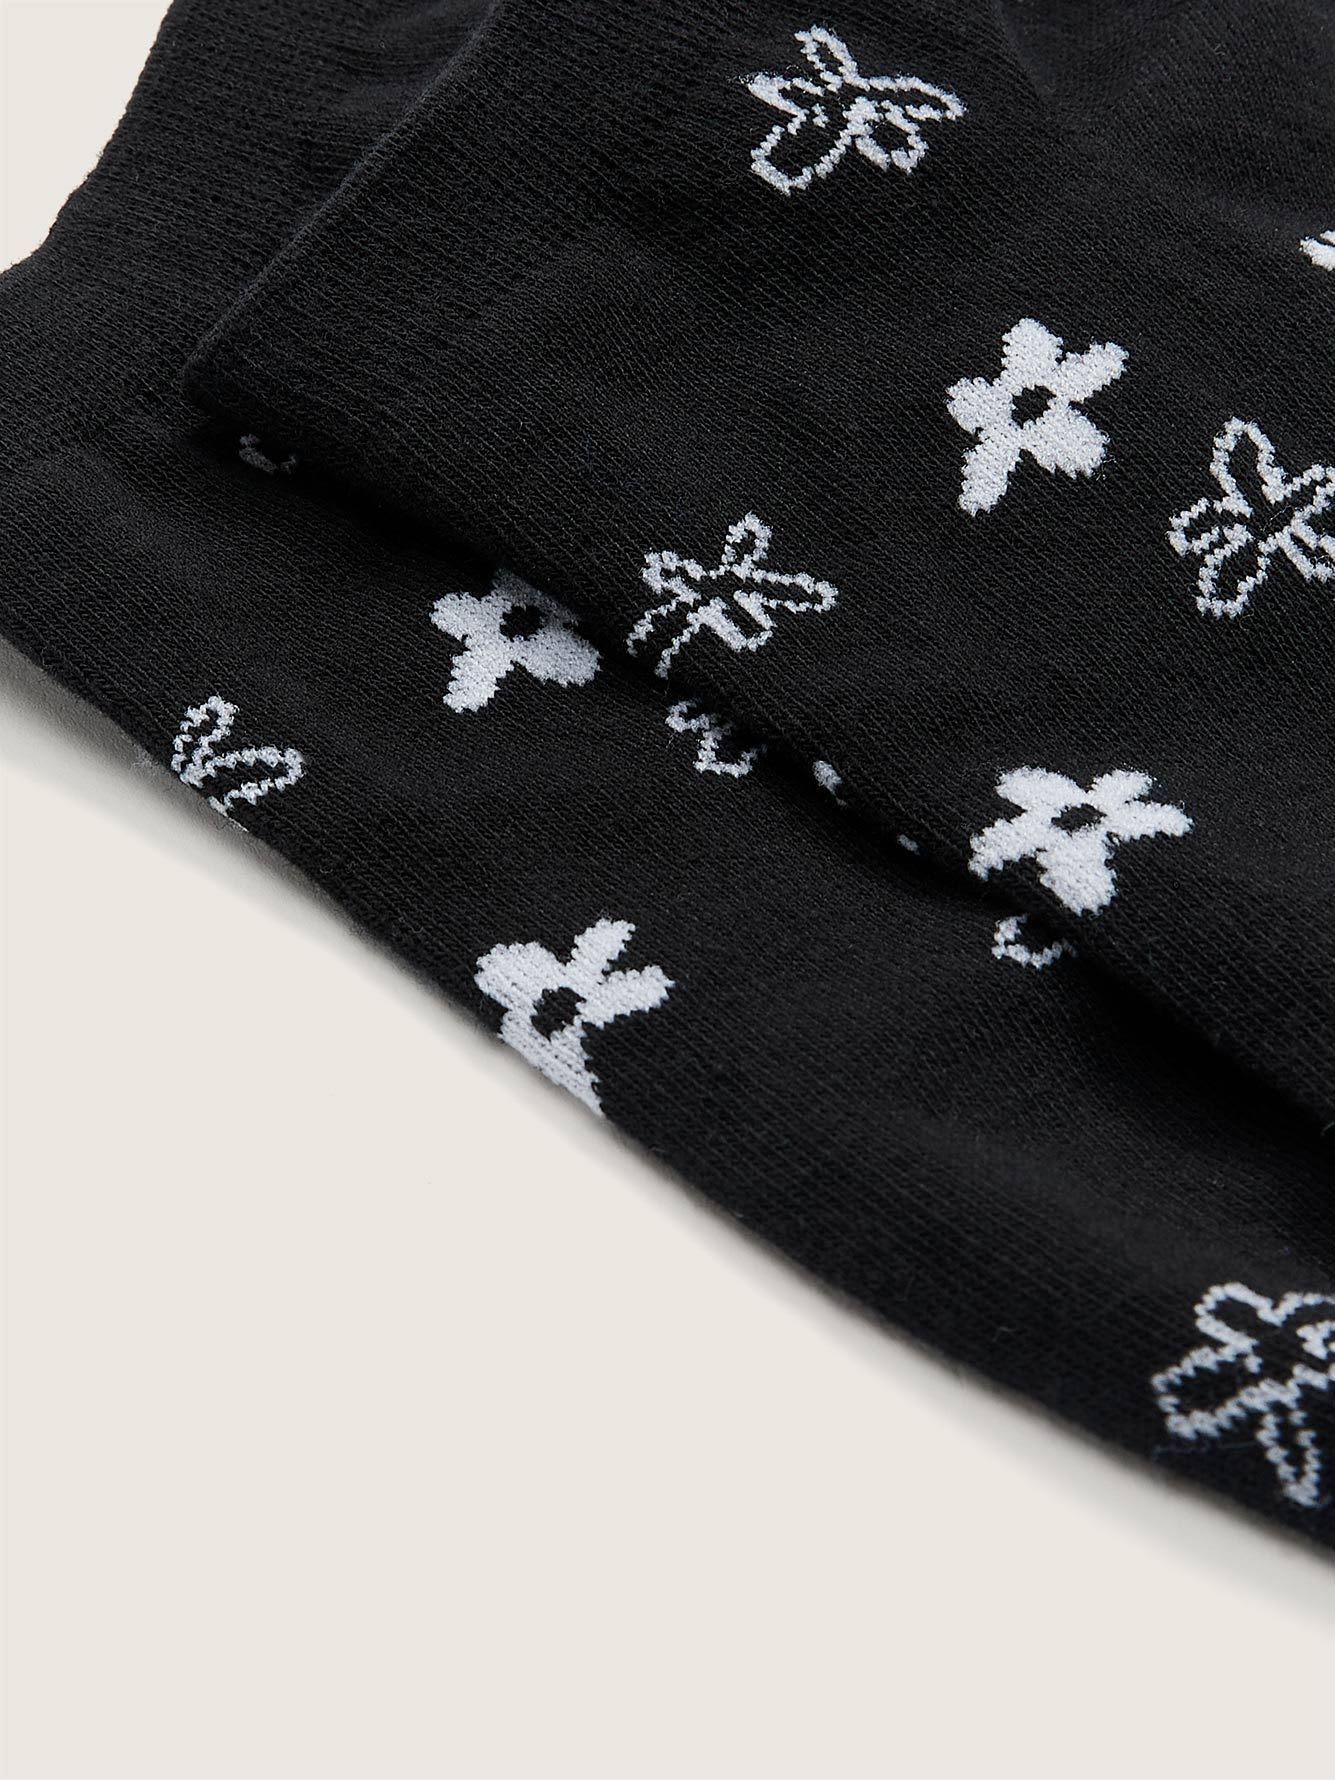 Ankle Socks with Daisy Pattern